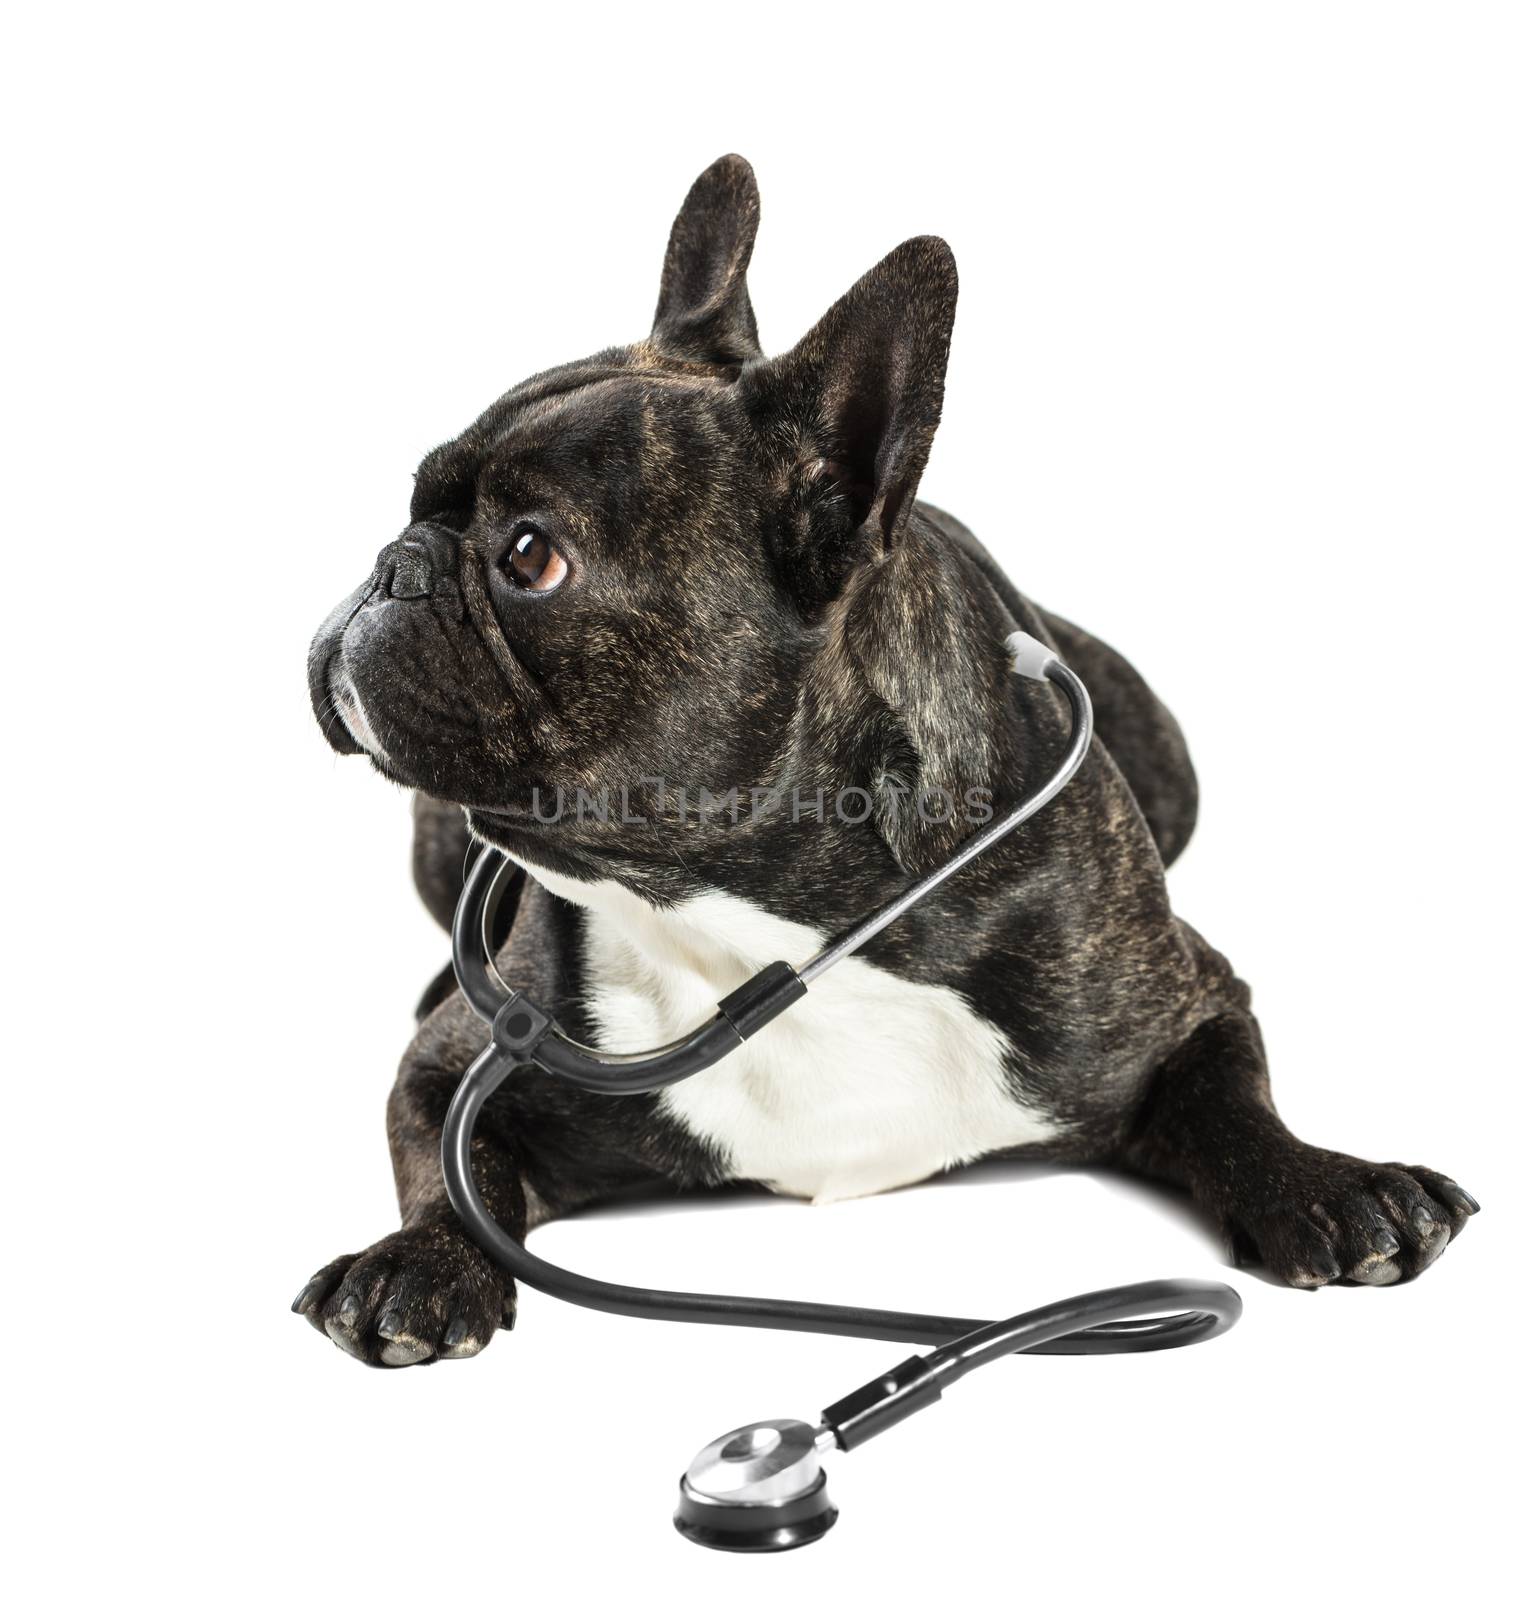 French bulldog with stethoscope on neck by MegaArt